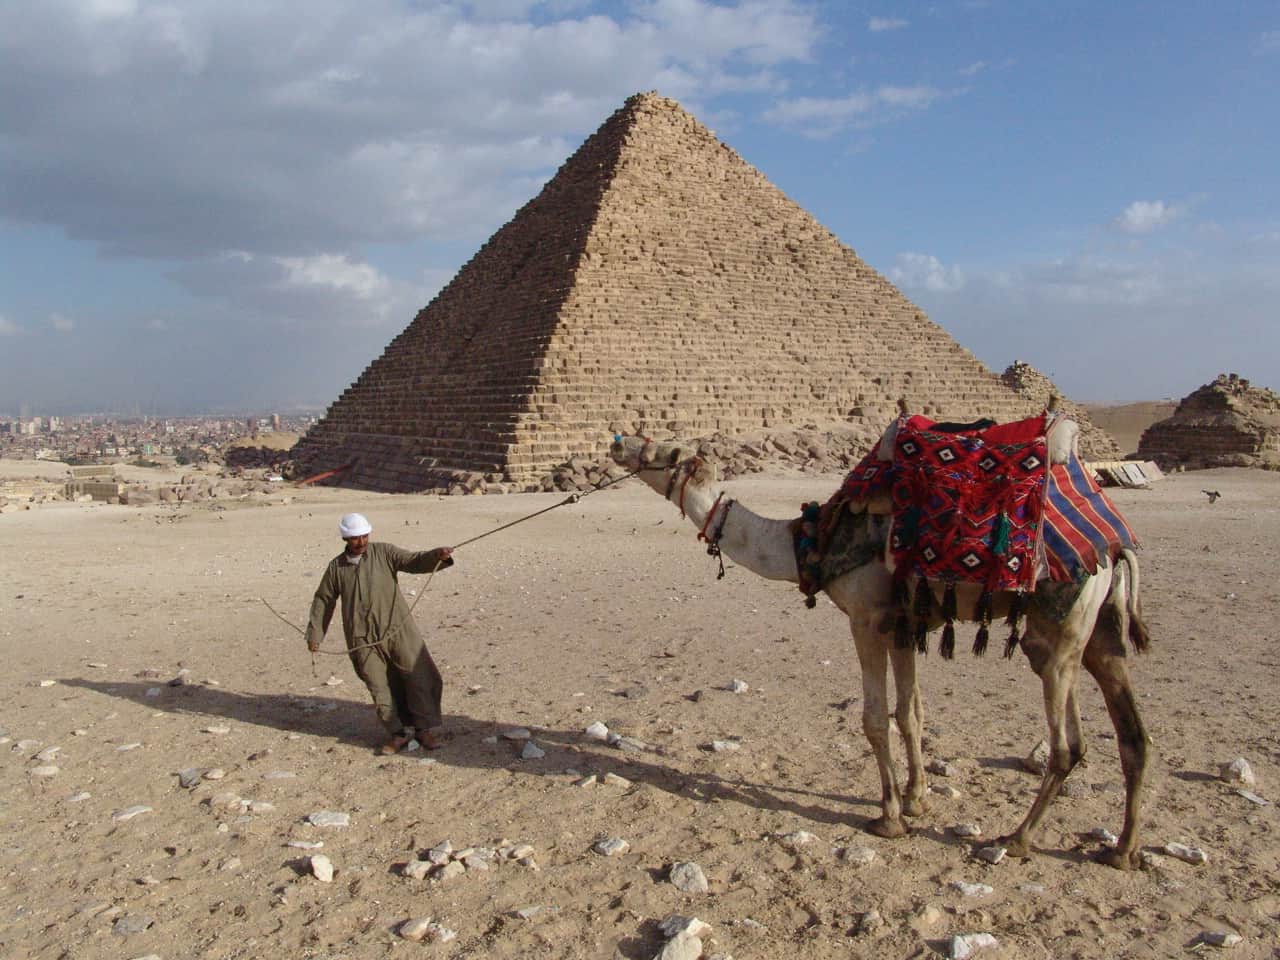 Camel driver at the Pyramids of Giza in Egypt